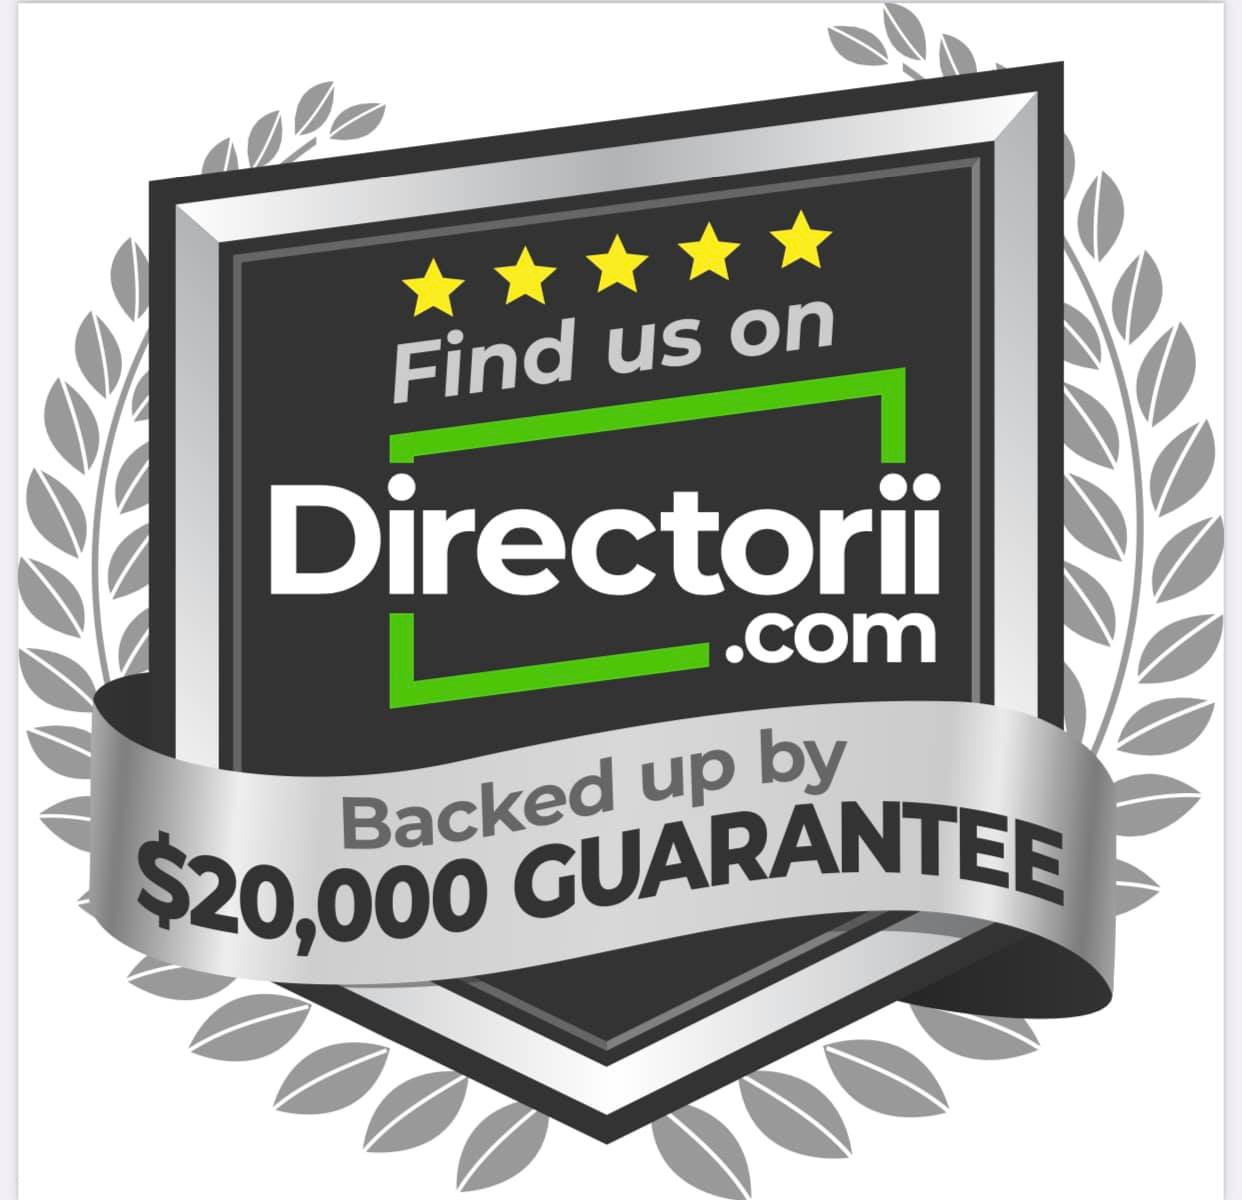 Badge indicating 'Find us on Directorii.com - Backed up by $20,000 Guarantee.'